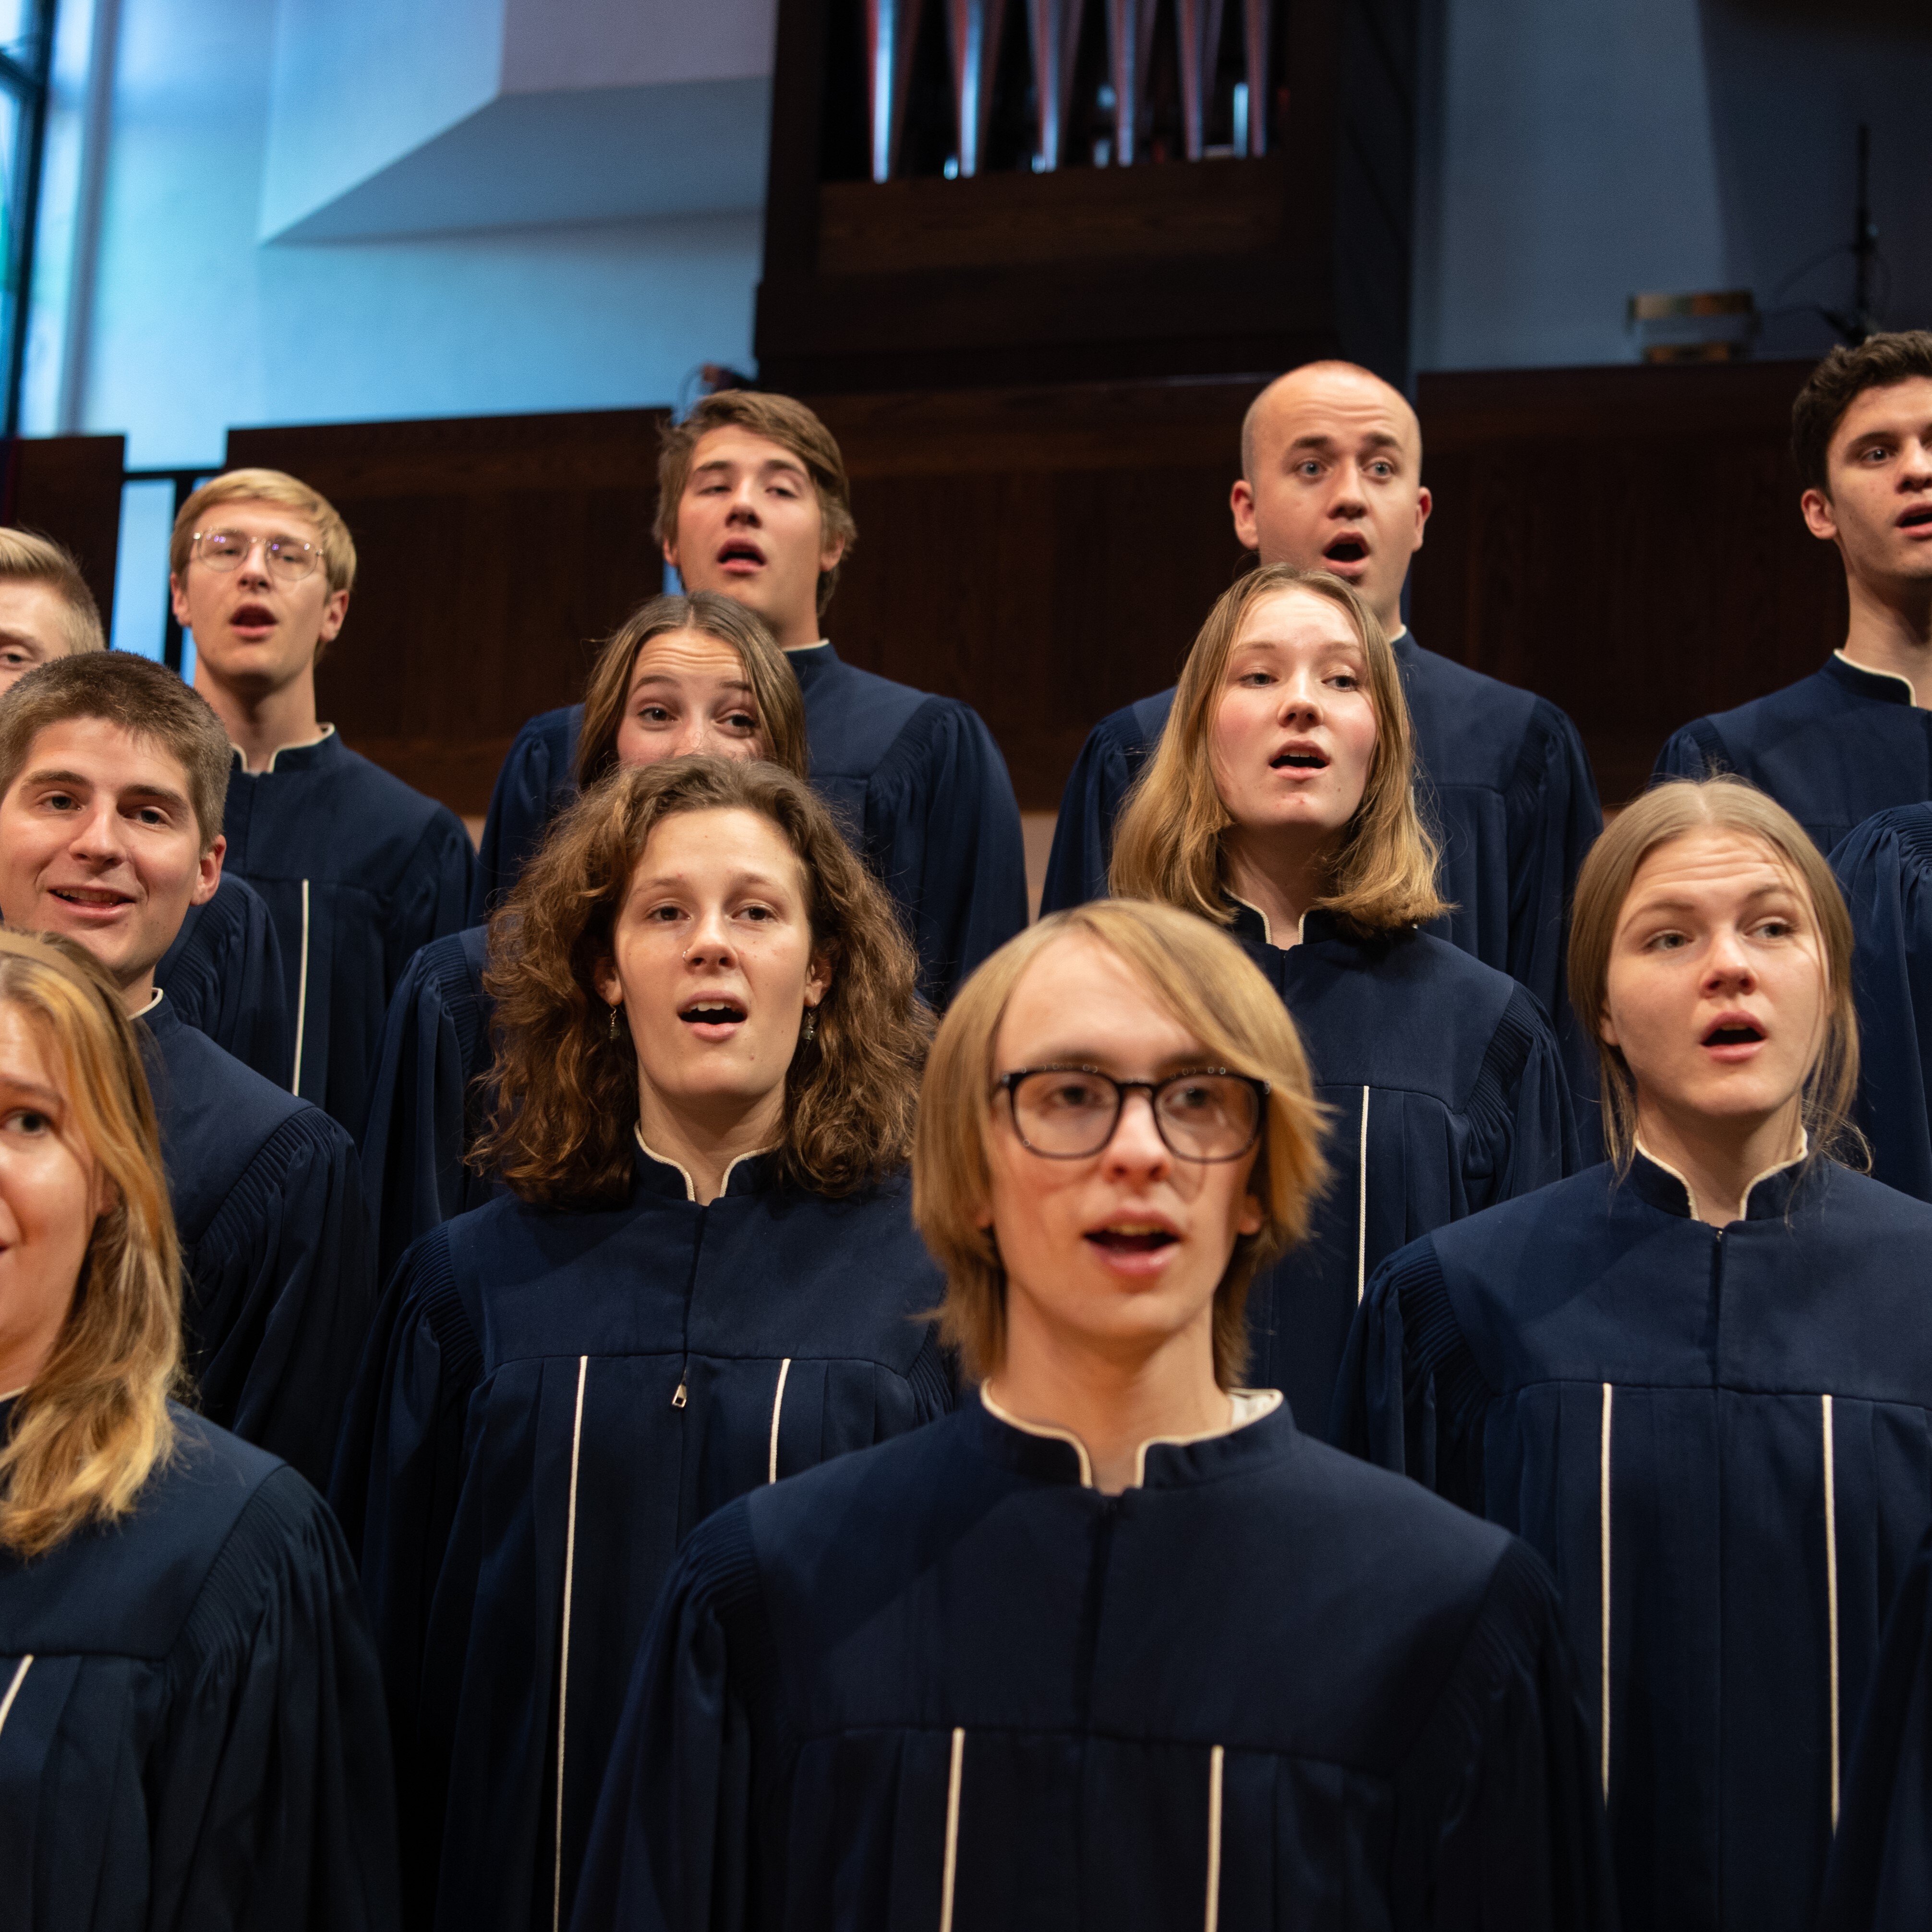 Students singing in a choir